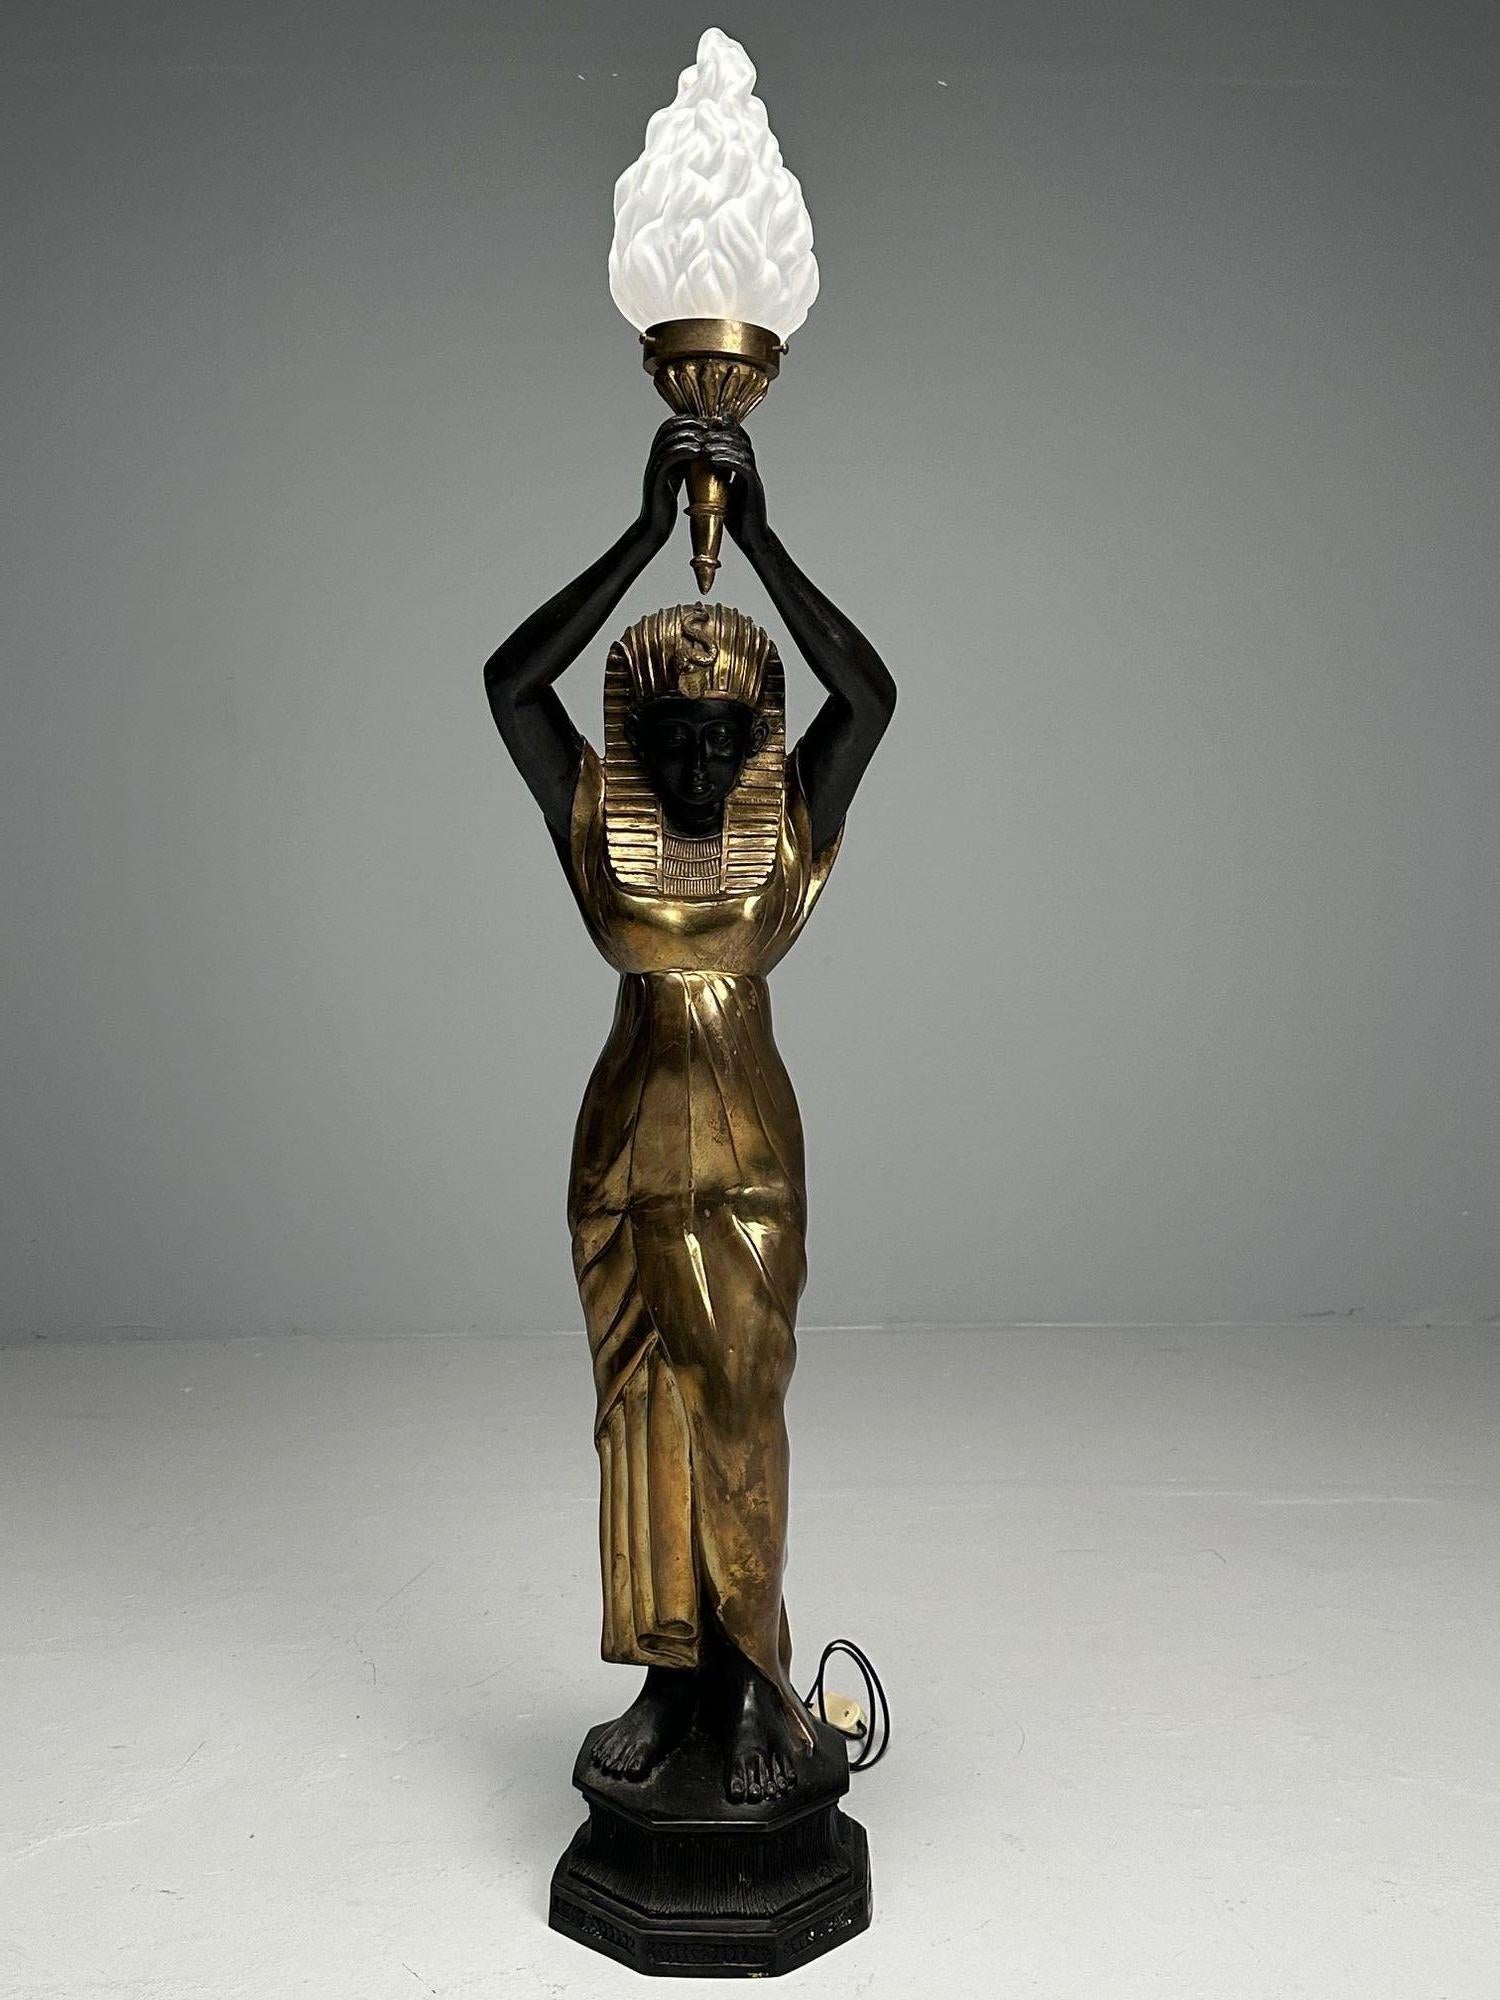 Regency Style Standing Lamp with Egyptian Motif, Gilt Metal, Bronze, 1990s

A stunning gilt metal and ebonize Nubian Egyptian goddess holding a Lalique style globe housing one light bulb. Wired.
Metal, Bronze, Glass
USA, 1990s

Height: 60.5 inches,